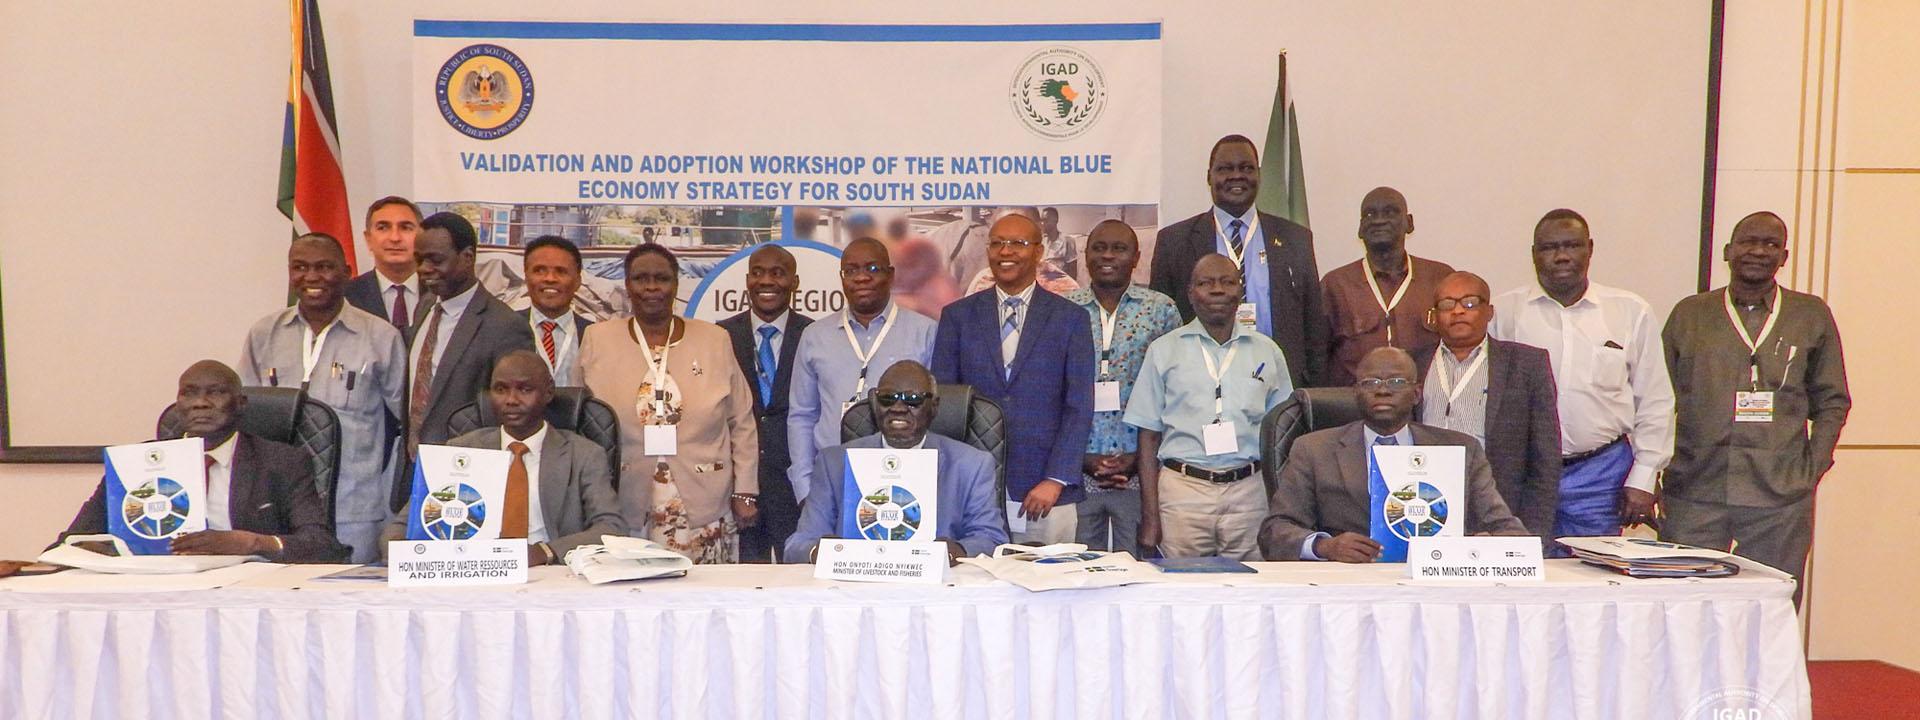 WATCH The Minister of Livestock & Fisheries of South Sudan, Hon Onyoti Adigo, wrapping up the Ministerial meeting for the adoption of the National Blue Economy Strategy 2023-2027